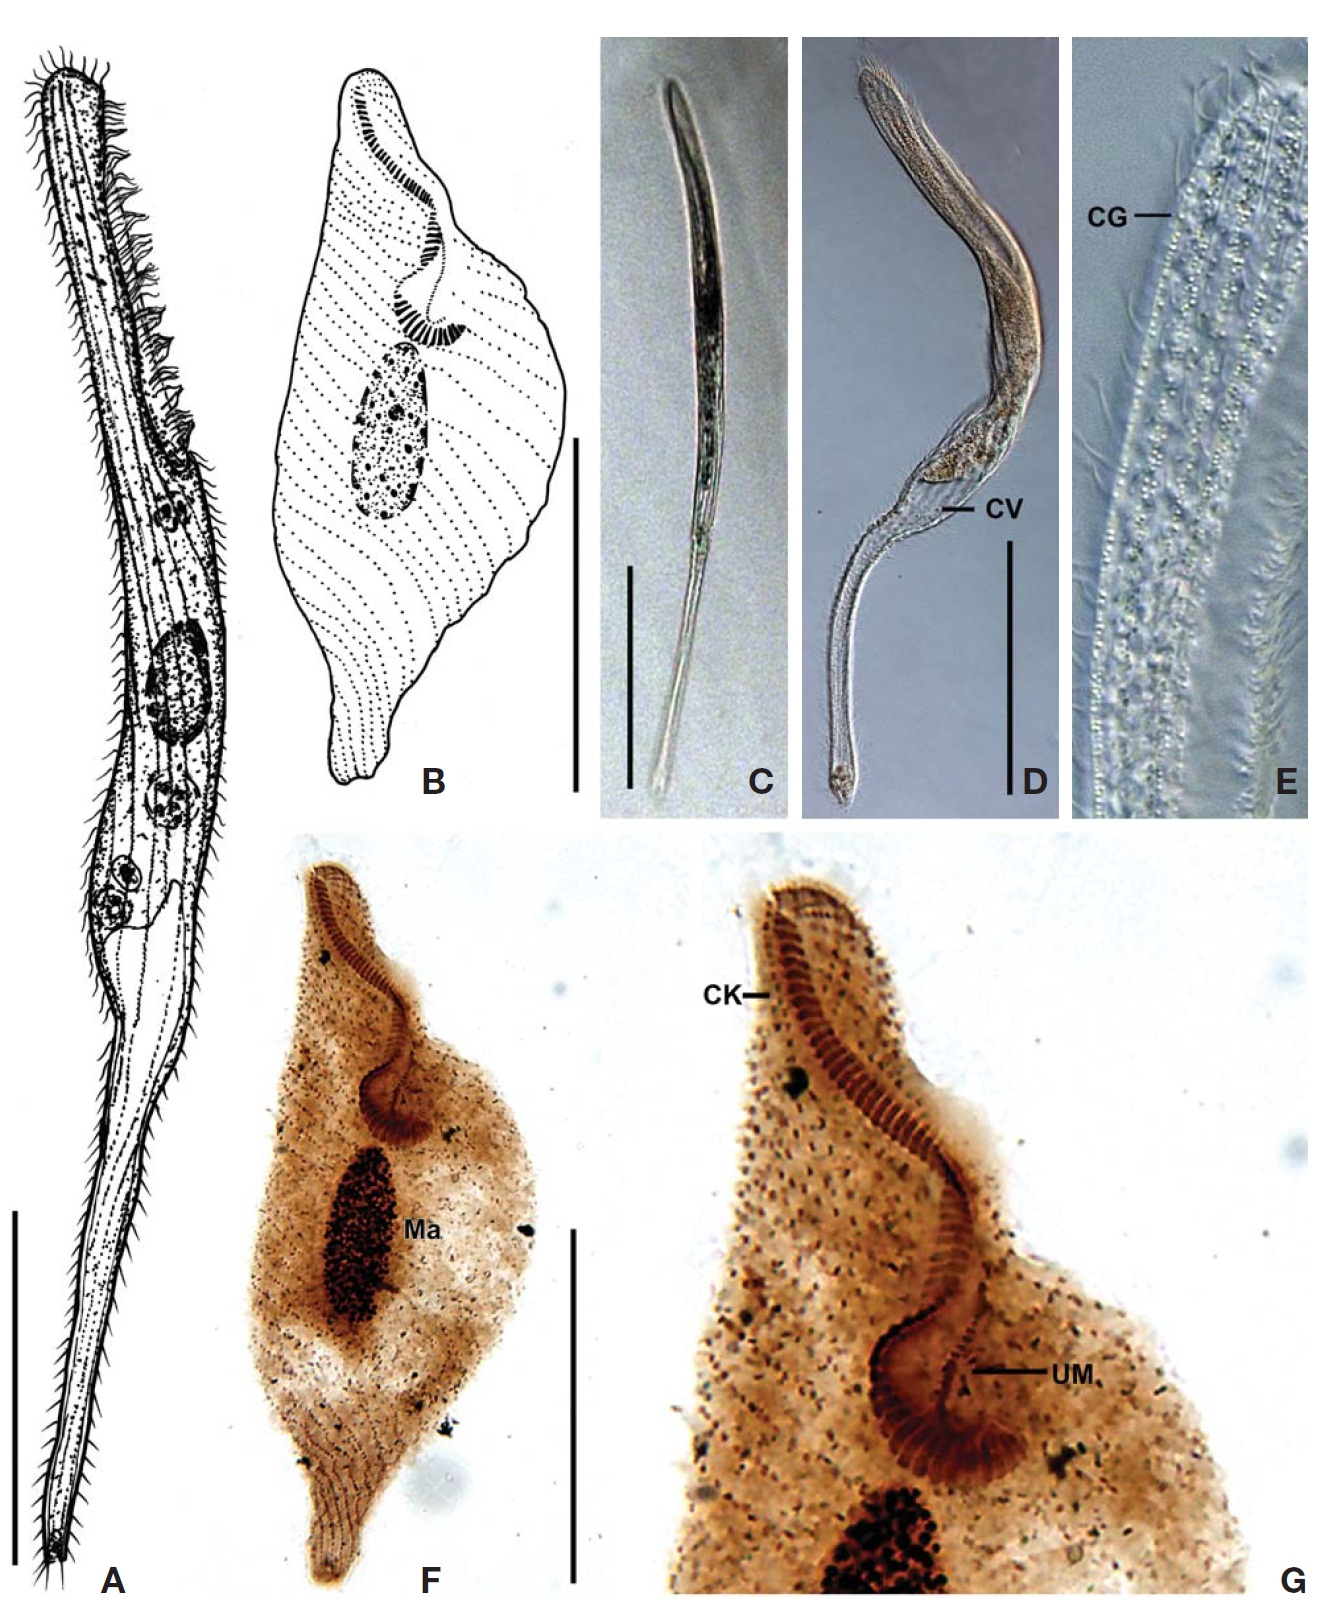 Spirostomum caudatum from live specimens (A C-E) and after protargol impregnation (B F G). A C The typicalindividuals; B F Ventral infraciliature; D The twisted body and contractile vacuole; E The cortical granules; G Buccal field. CGcortical granule; CK circumoral kinety; CV contractile vacuole; Ma macronucleus; UM undulating membrane. Scale bars: A C D=100 μm; B F=70 μm.